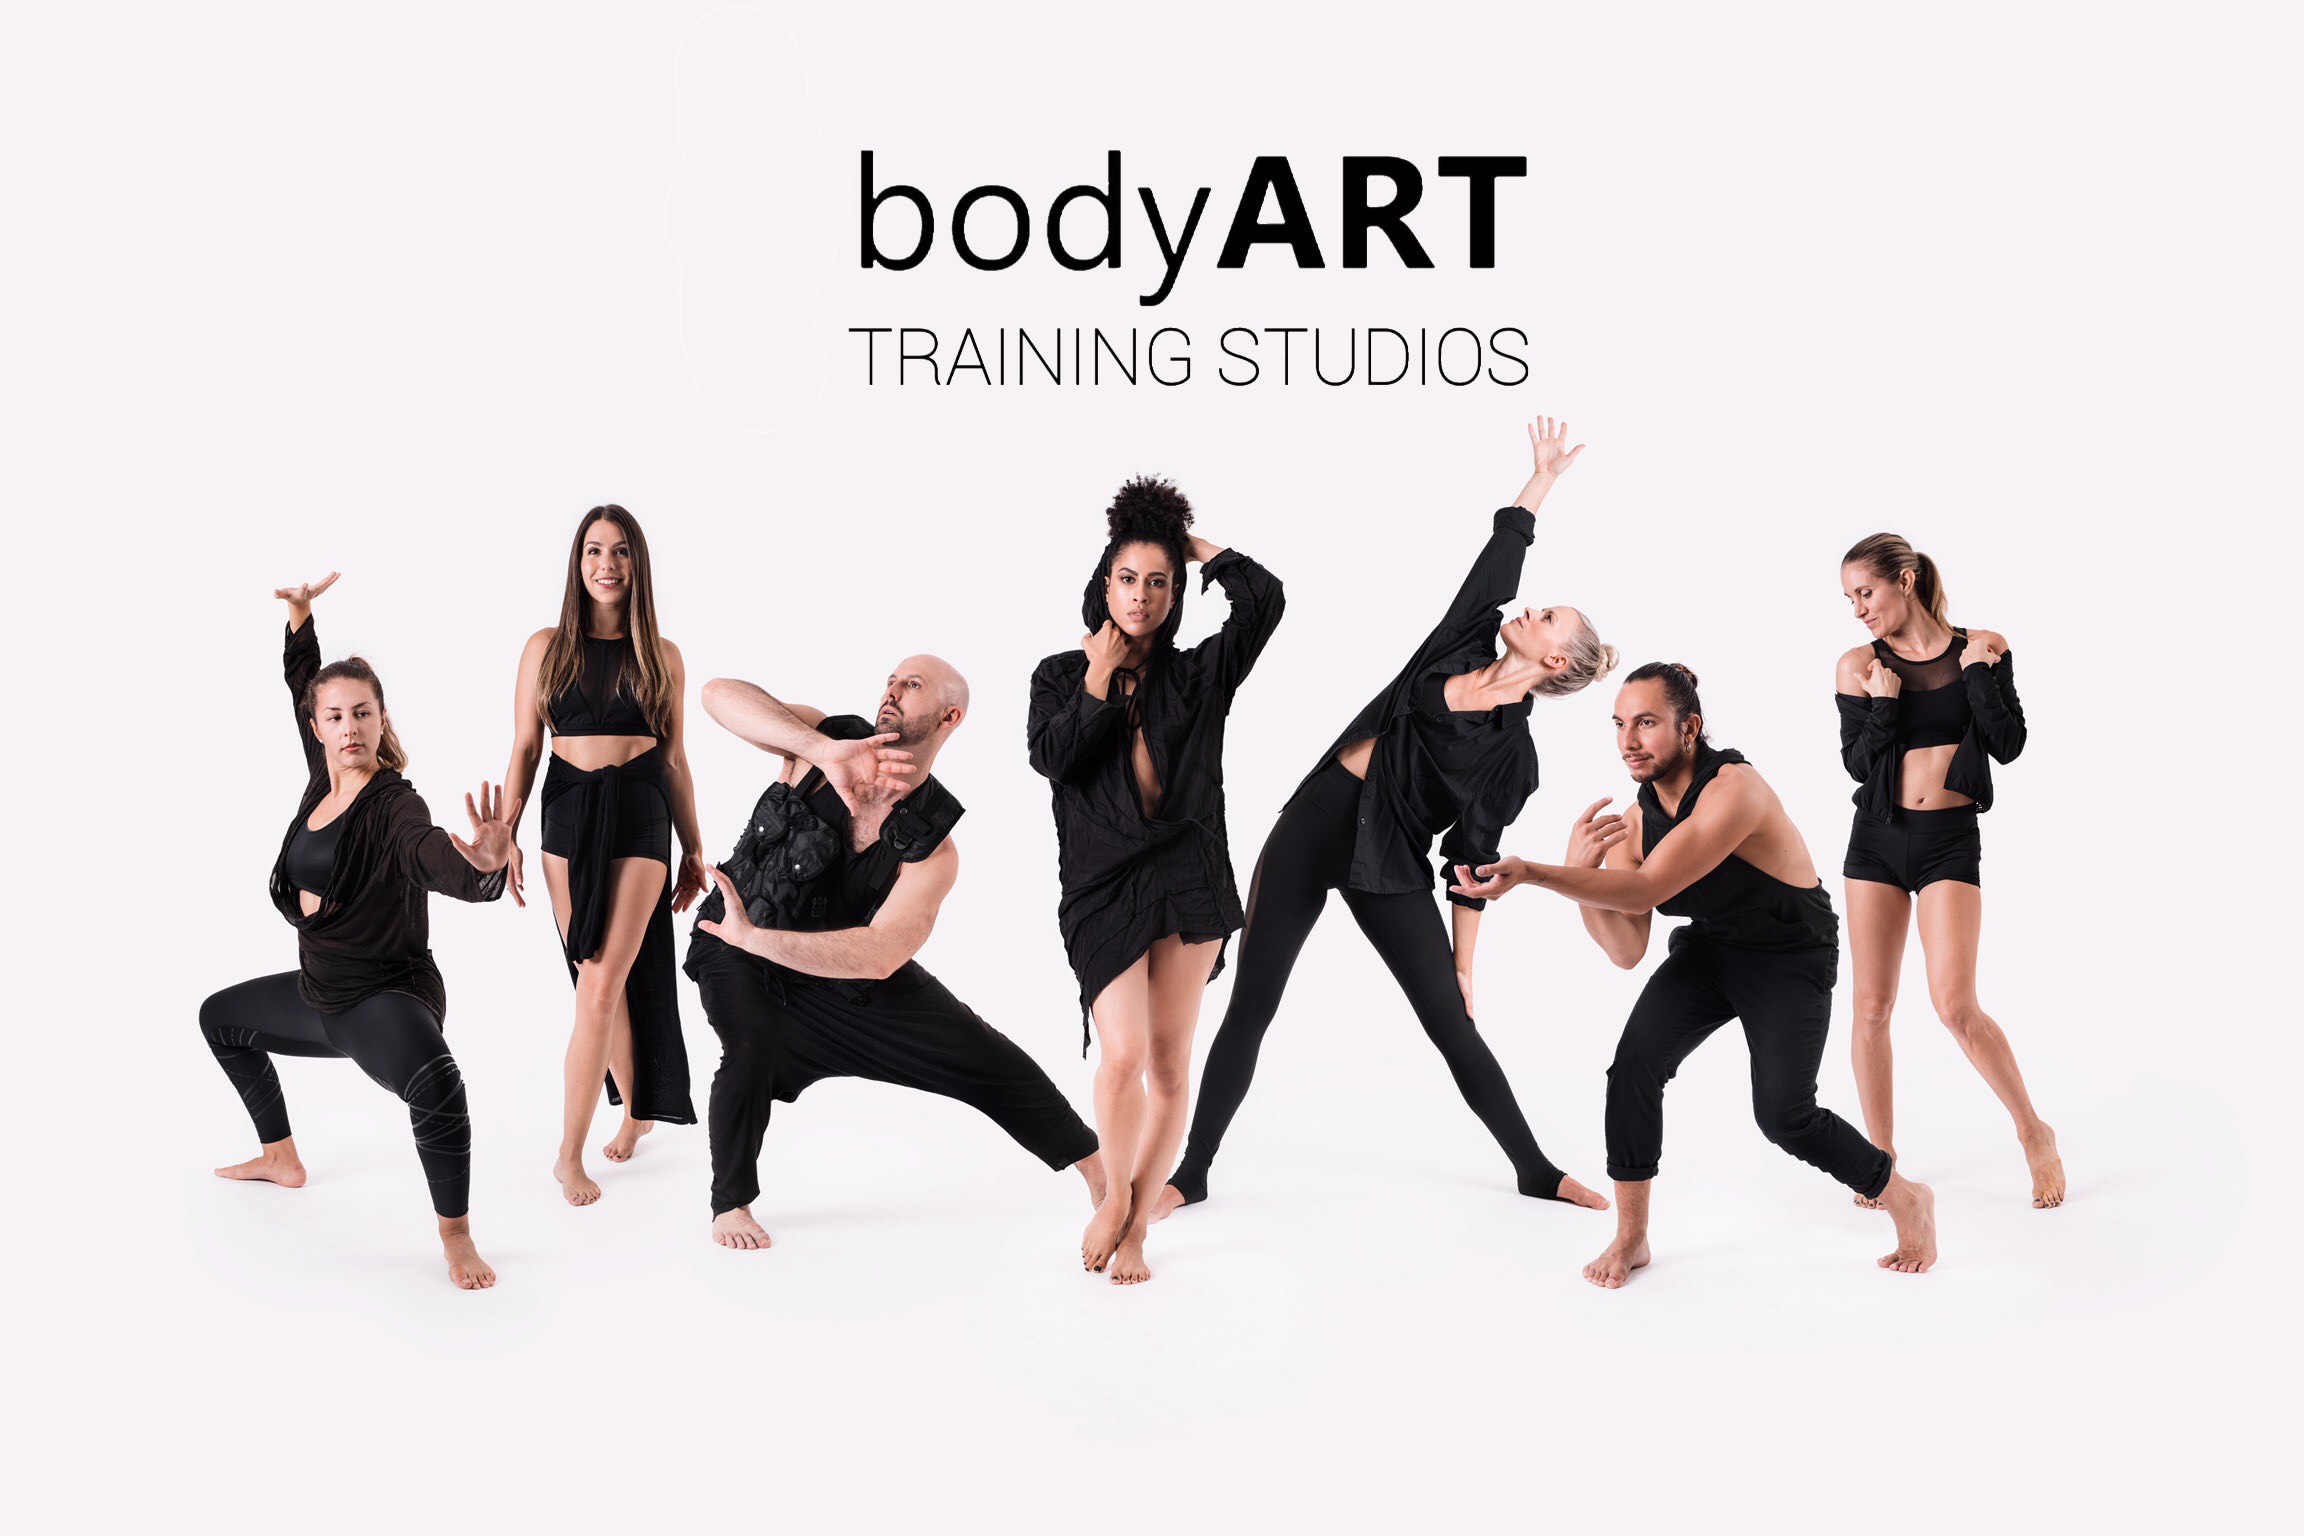 Visit the bodyART Movement Experience event page